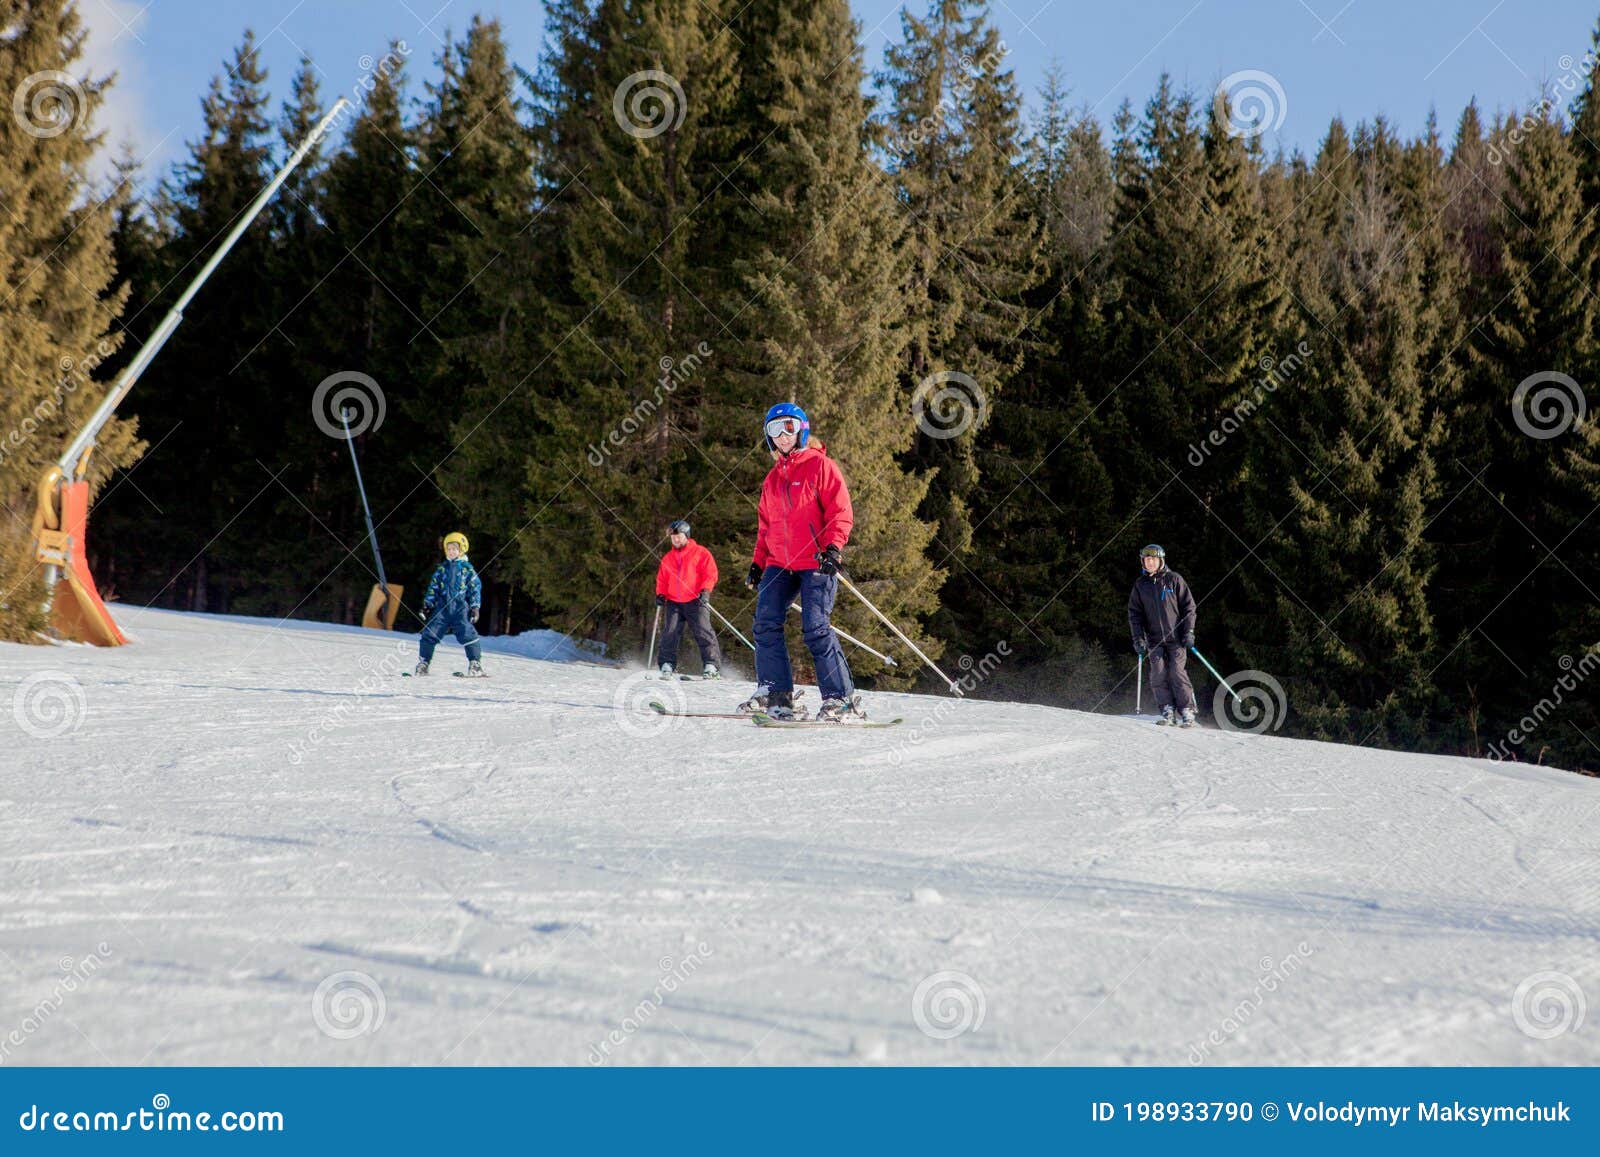 Skiing People and the Chair Lifts of Ski Region in Ukraine Editorial ...